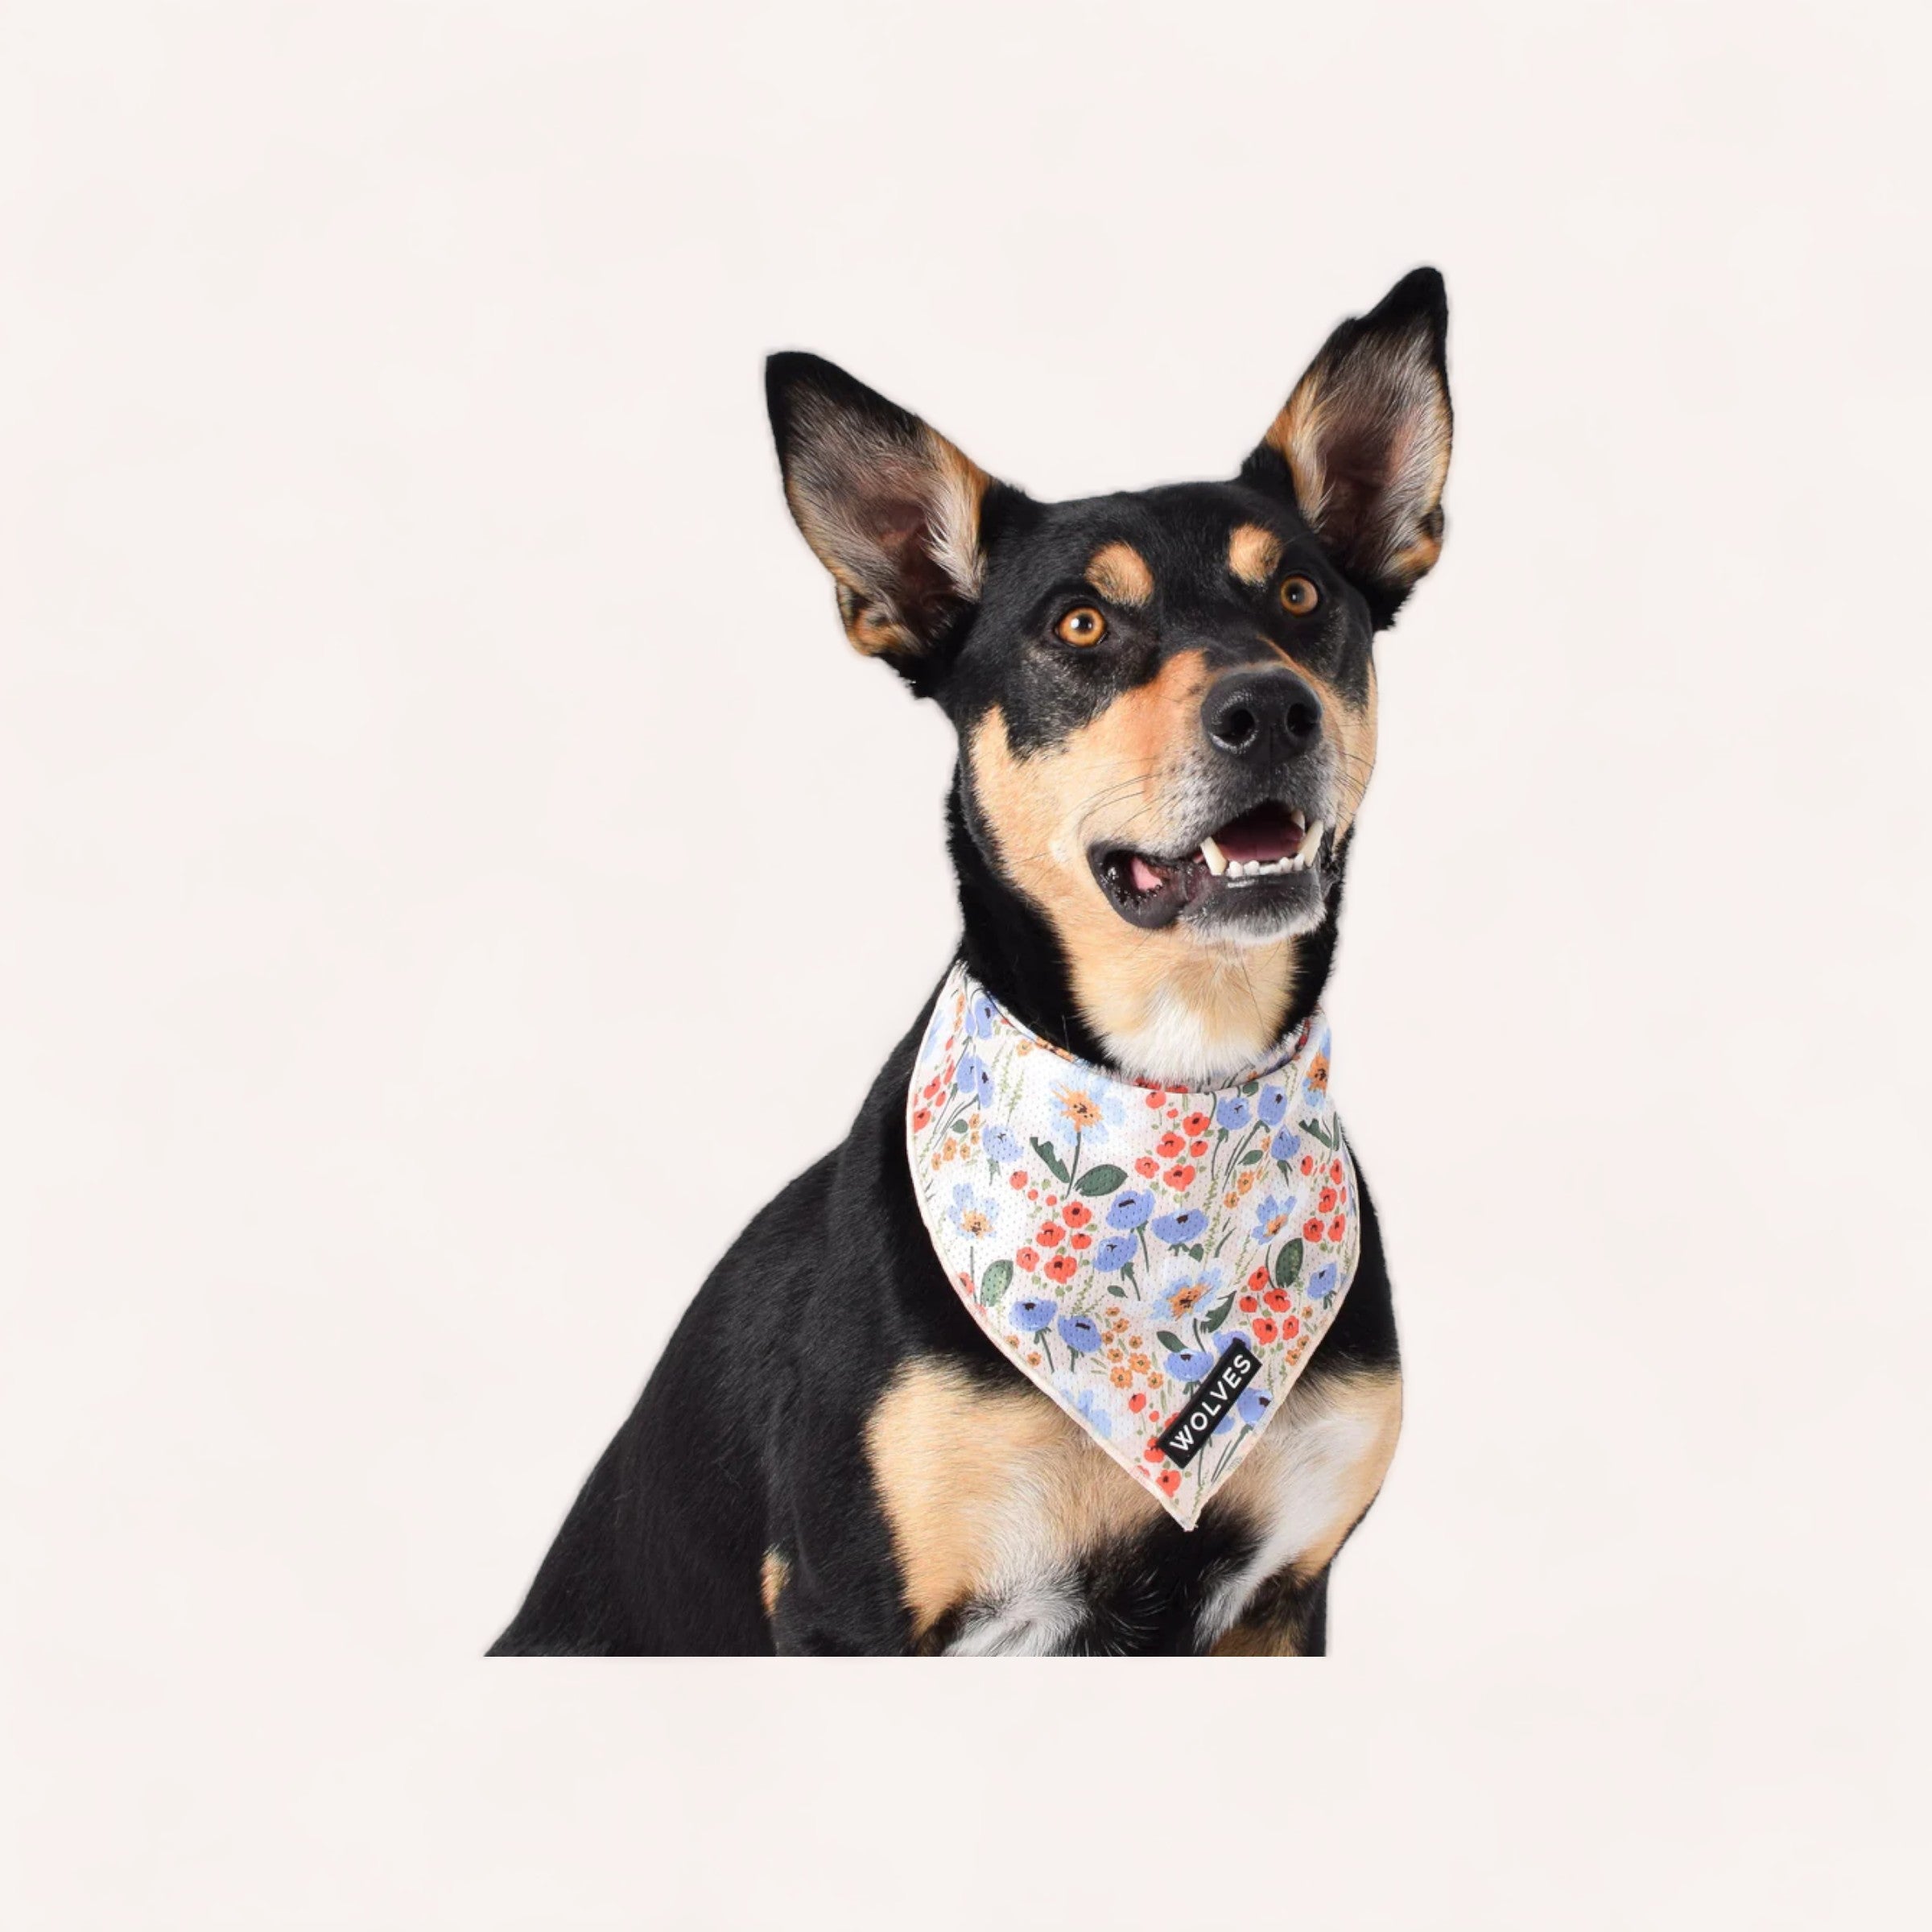 A cheerful dog with a Posy Bandana by Wolves of Wellington made of wrinkle-free mesh material, tilting its head curiously on a white background.